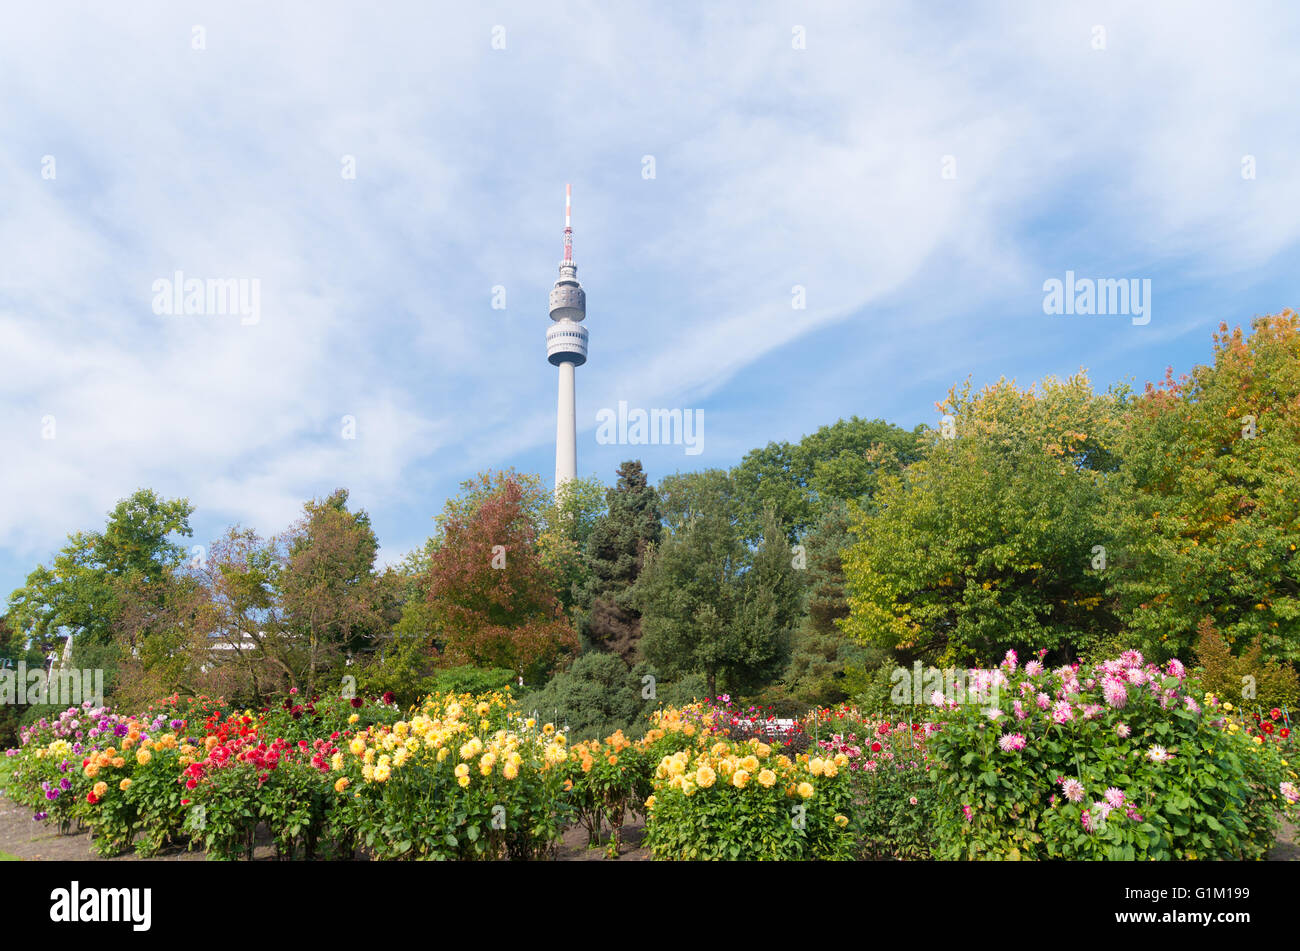 DORTMUND, GERMANY - OCTOBER 4, 2015: Florianturm (Florian Tower) in the Westfalen park. Built in 1959 it has a height of 720 ft Stock Photo